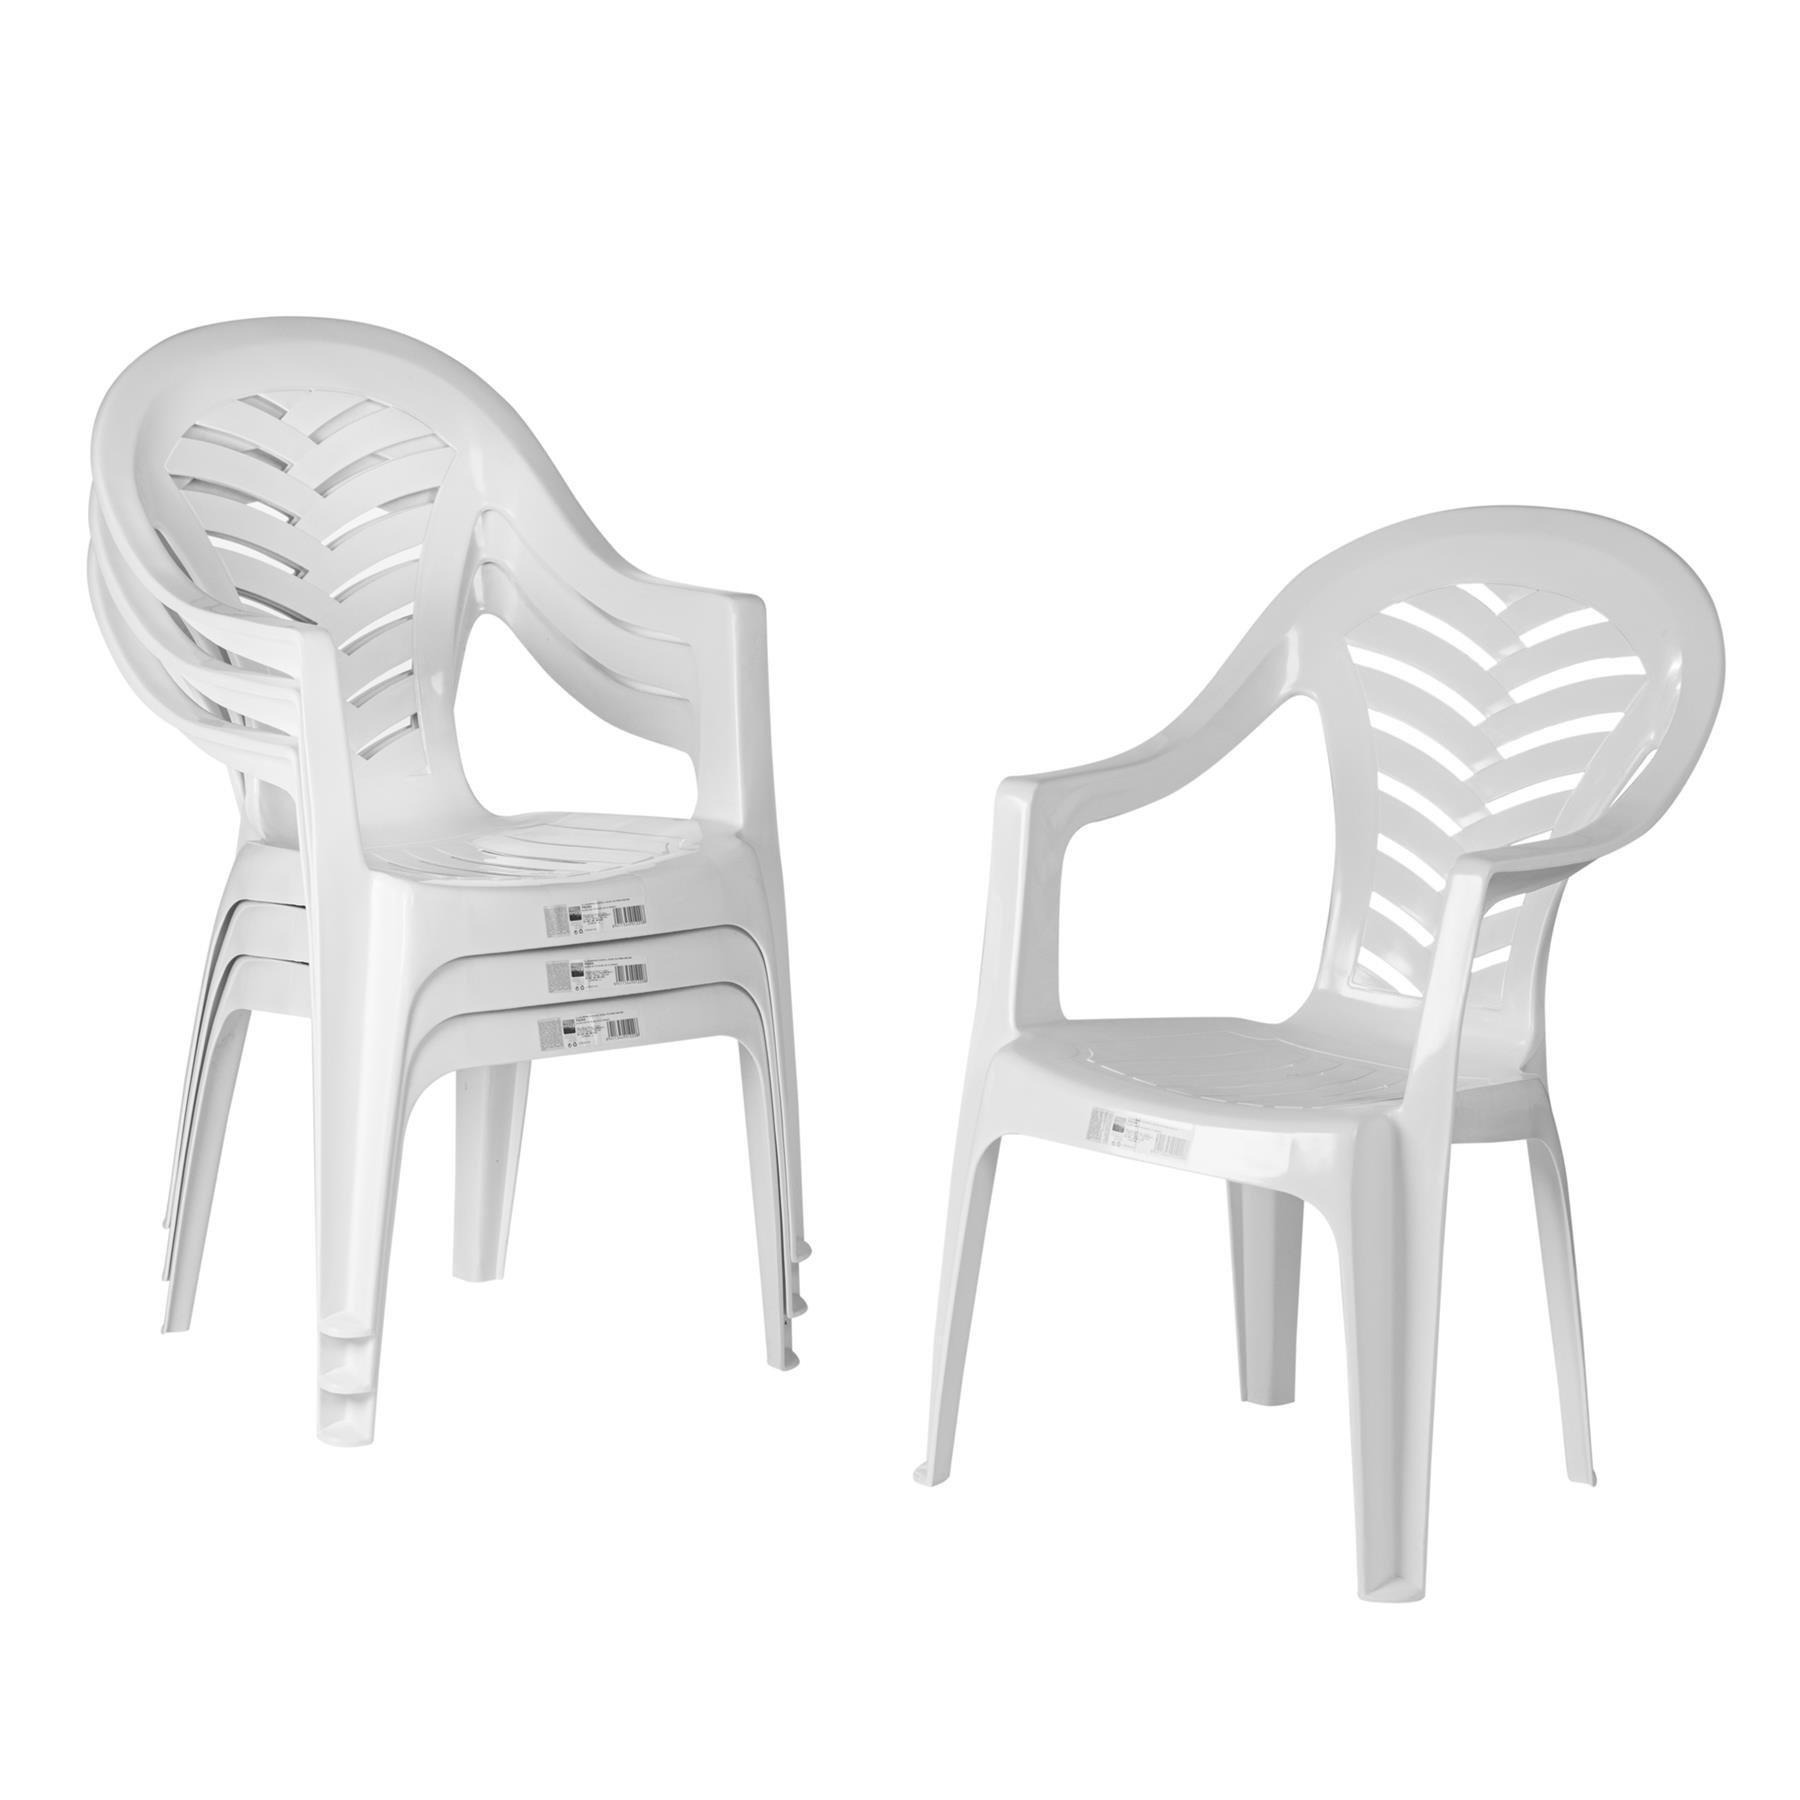 Palma Garden Dining Chairs Pack of 8 - image 1